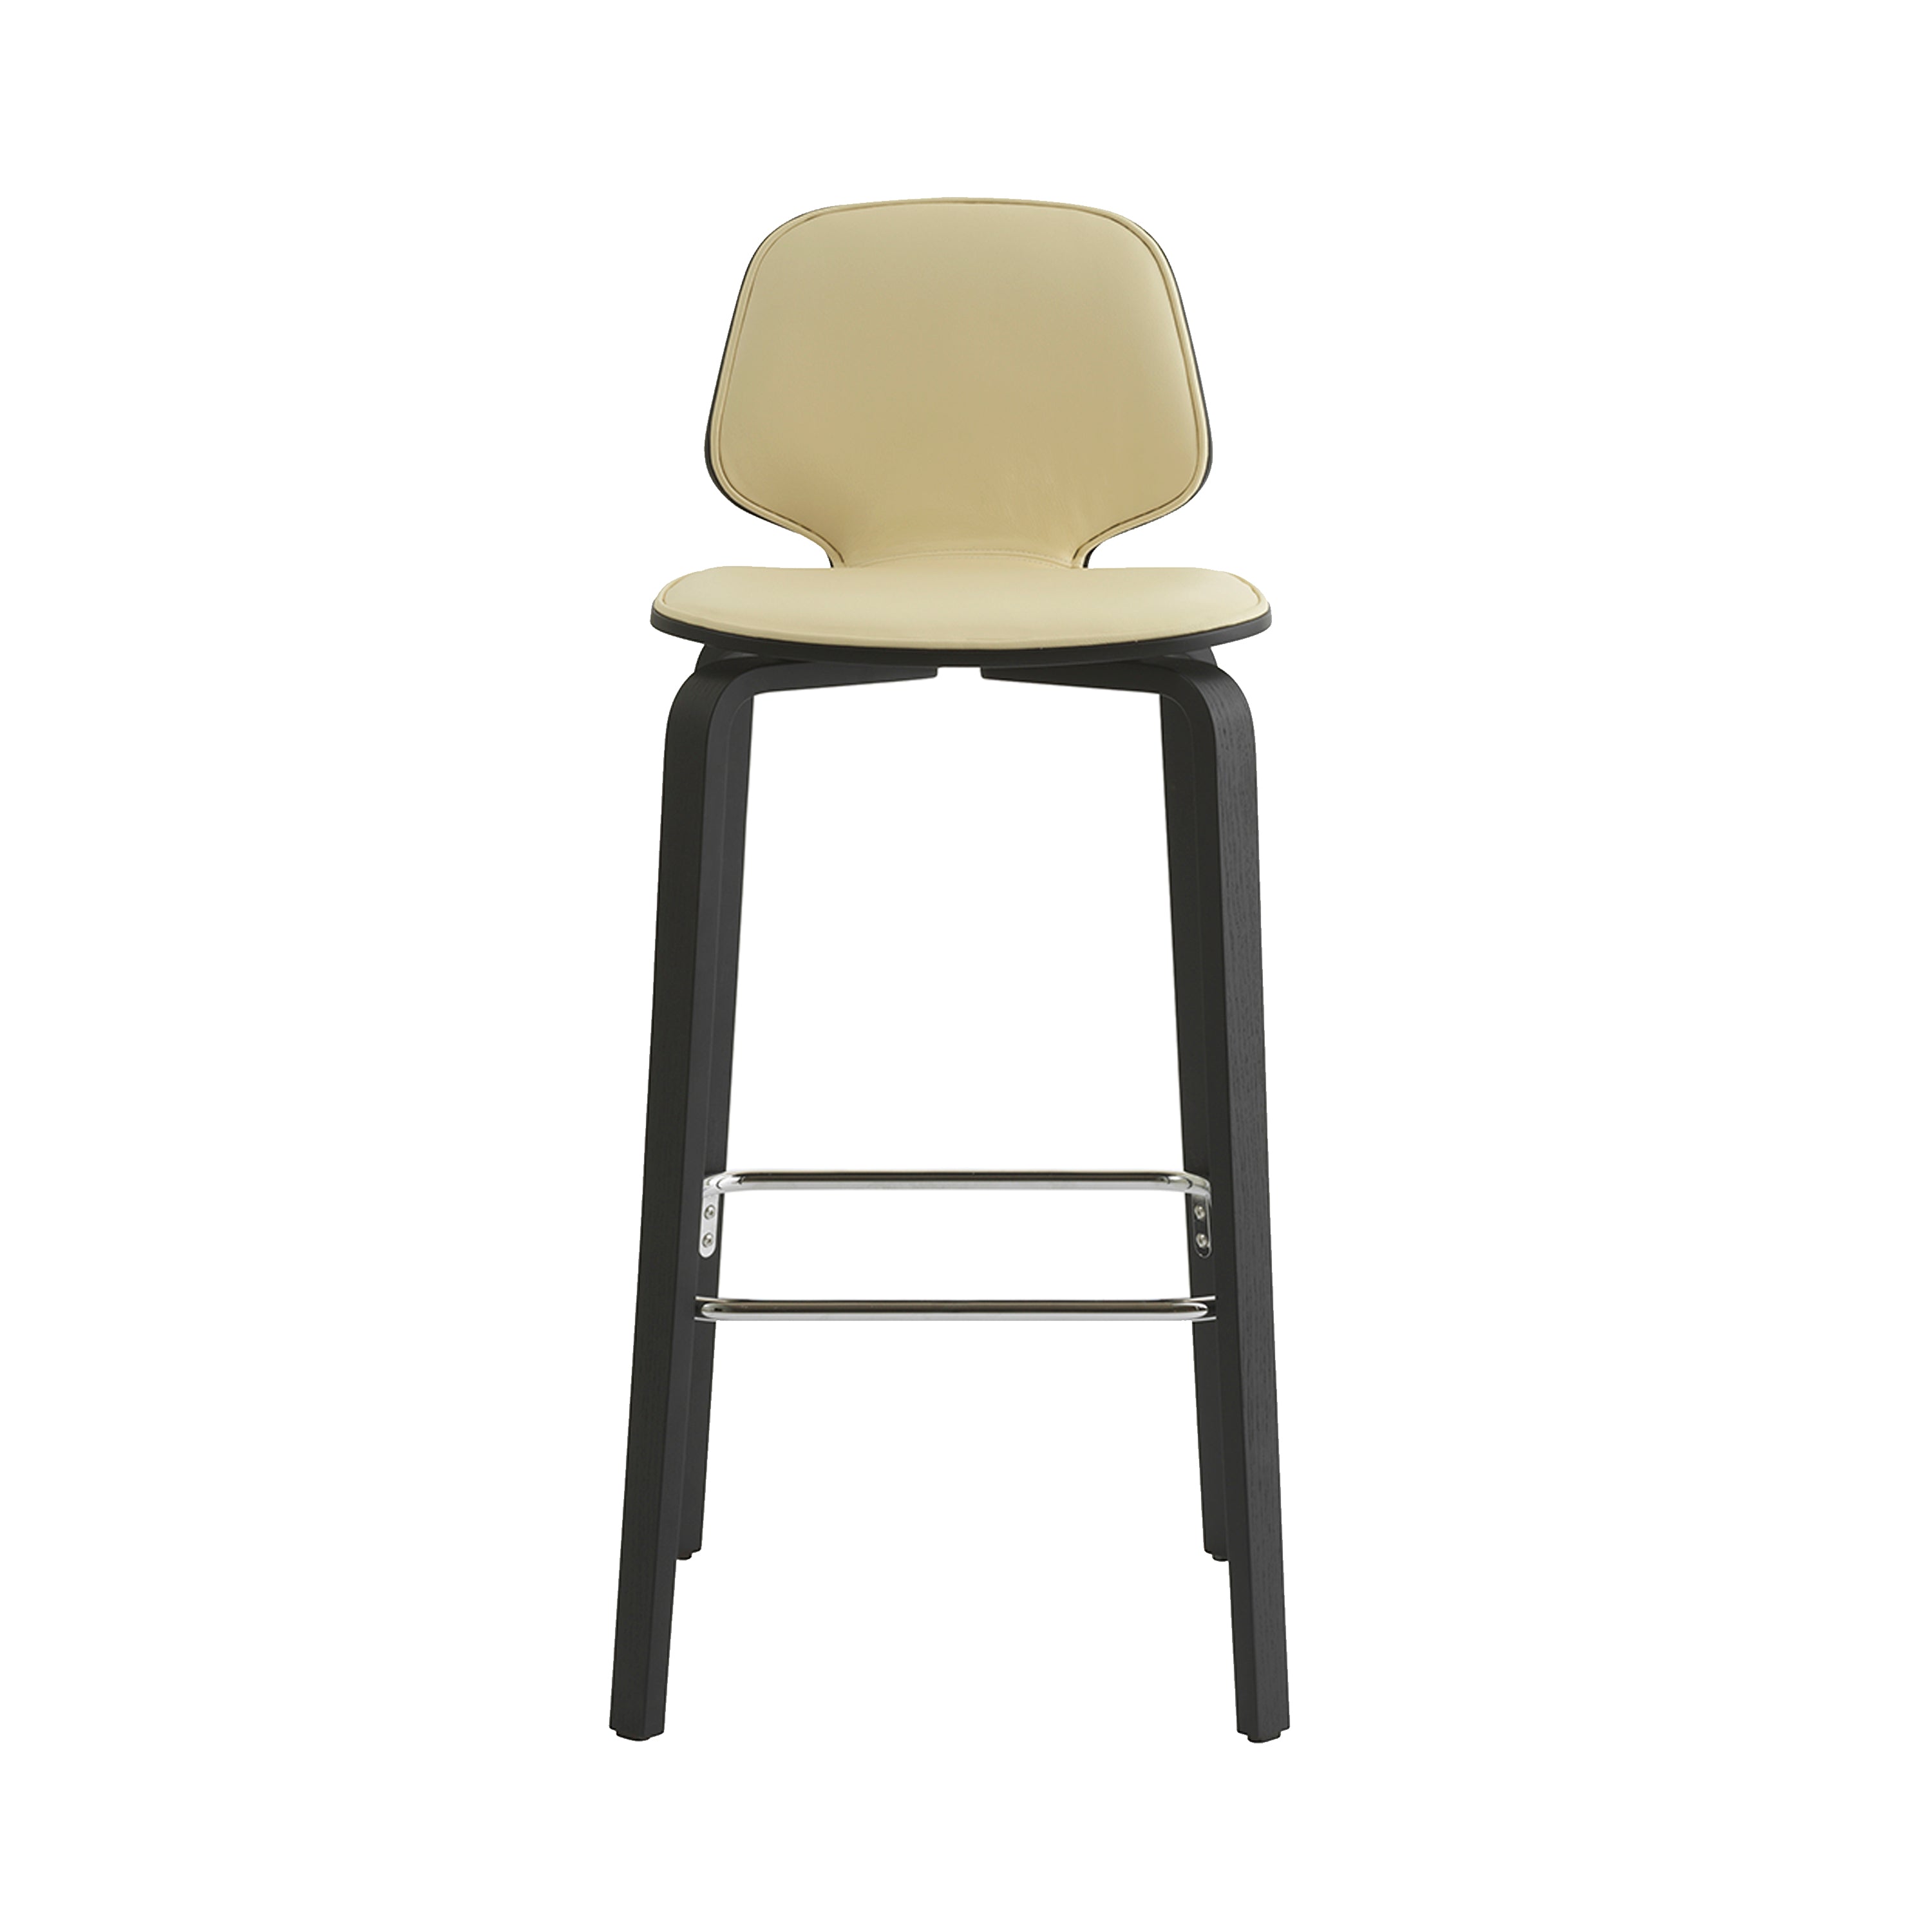 My Chair Bar + Counter Stool: Wood Front Upholstered + Bar + Black